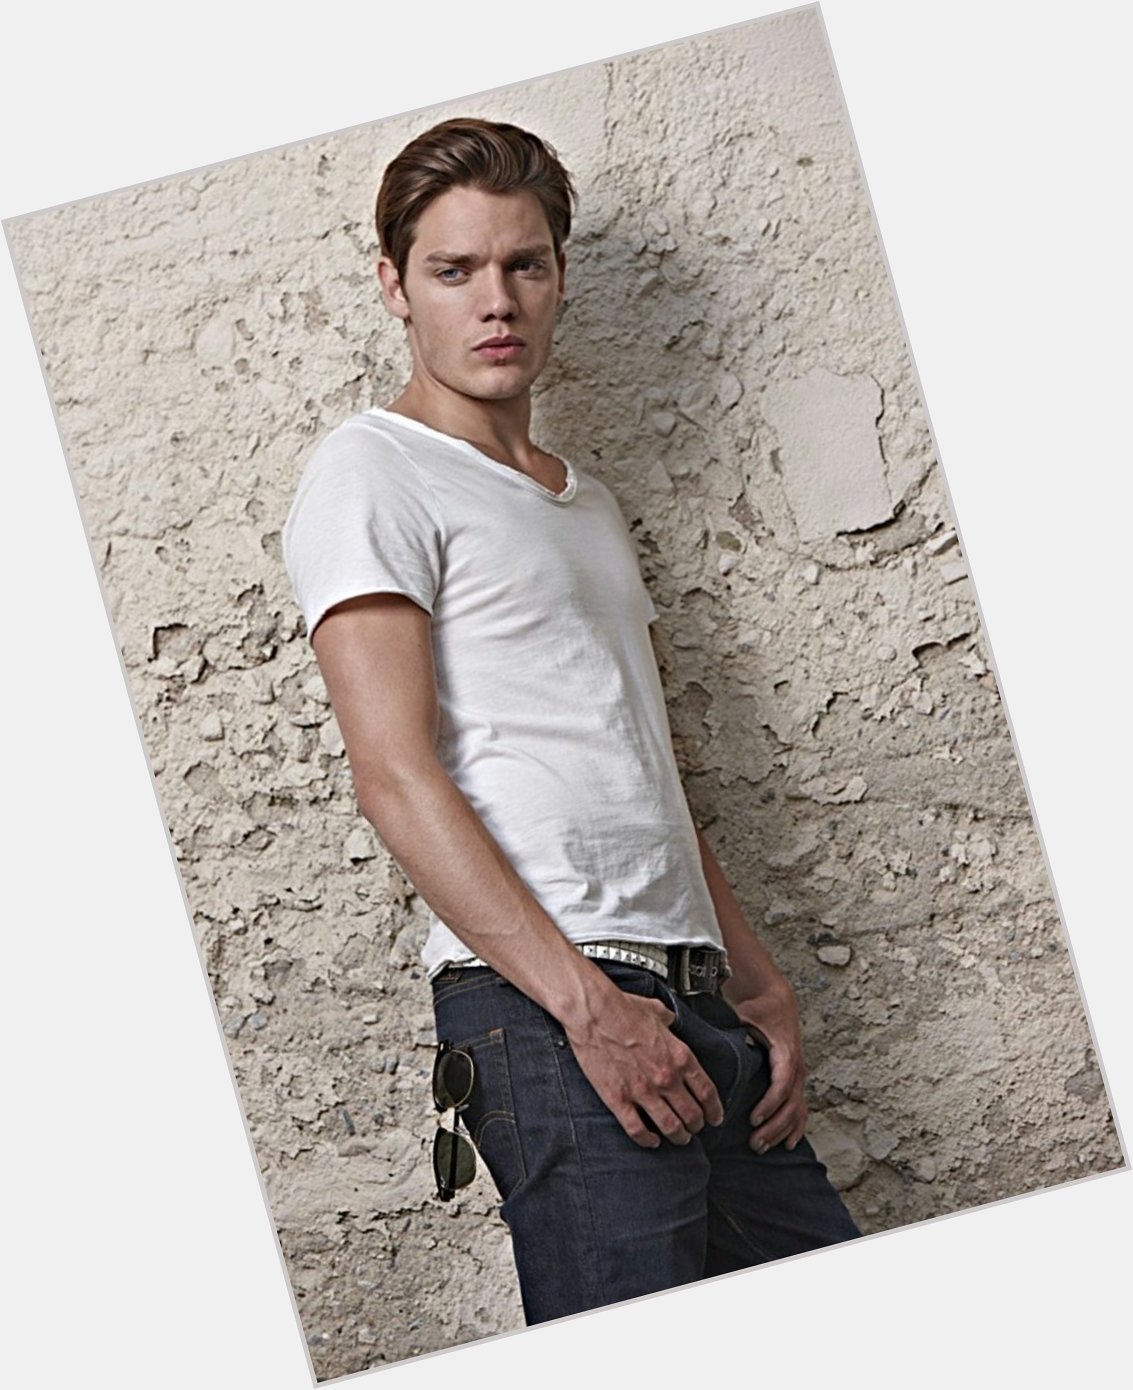   Happy Birthday To An Awesome Actor Dominic Sherwood!     